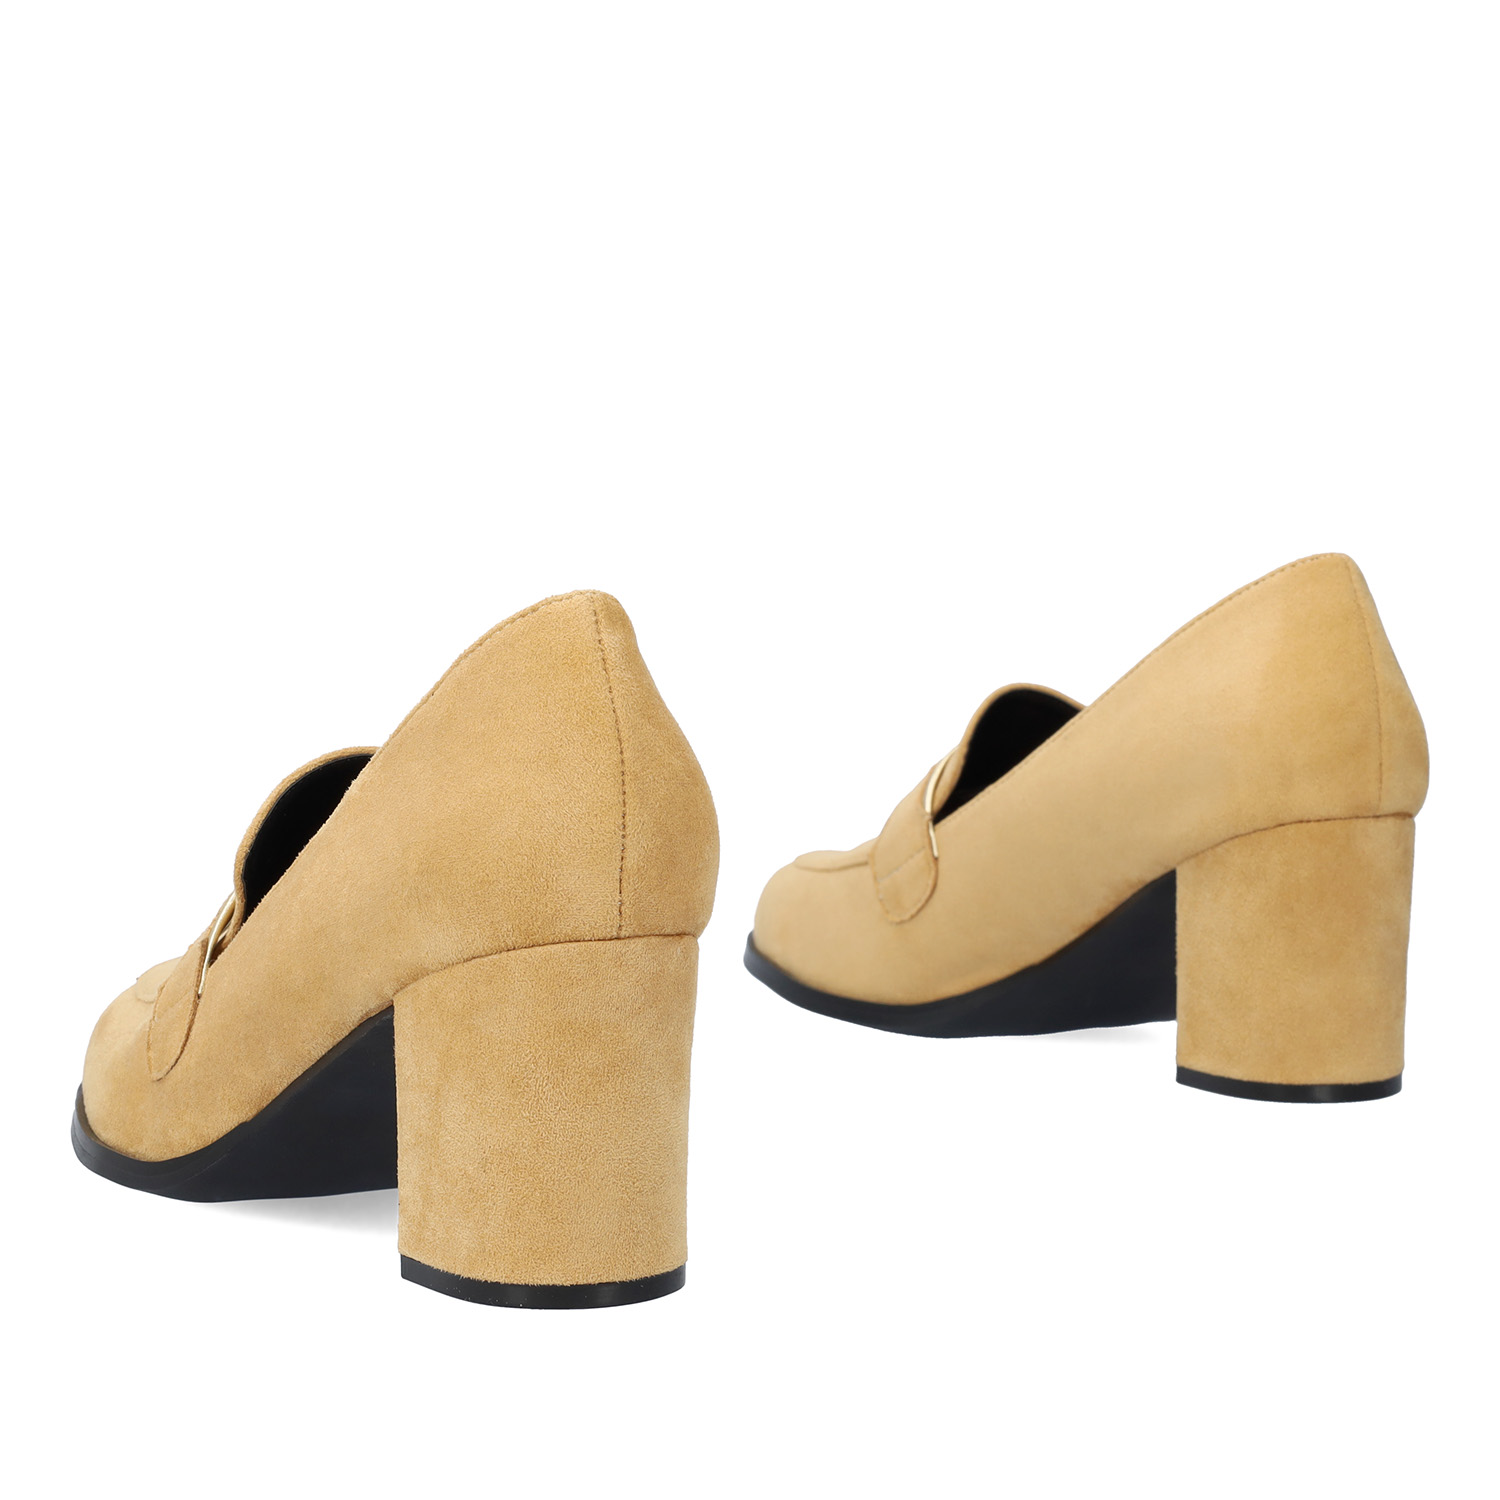 Heeled moccasins in beige-colored faux suede 